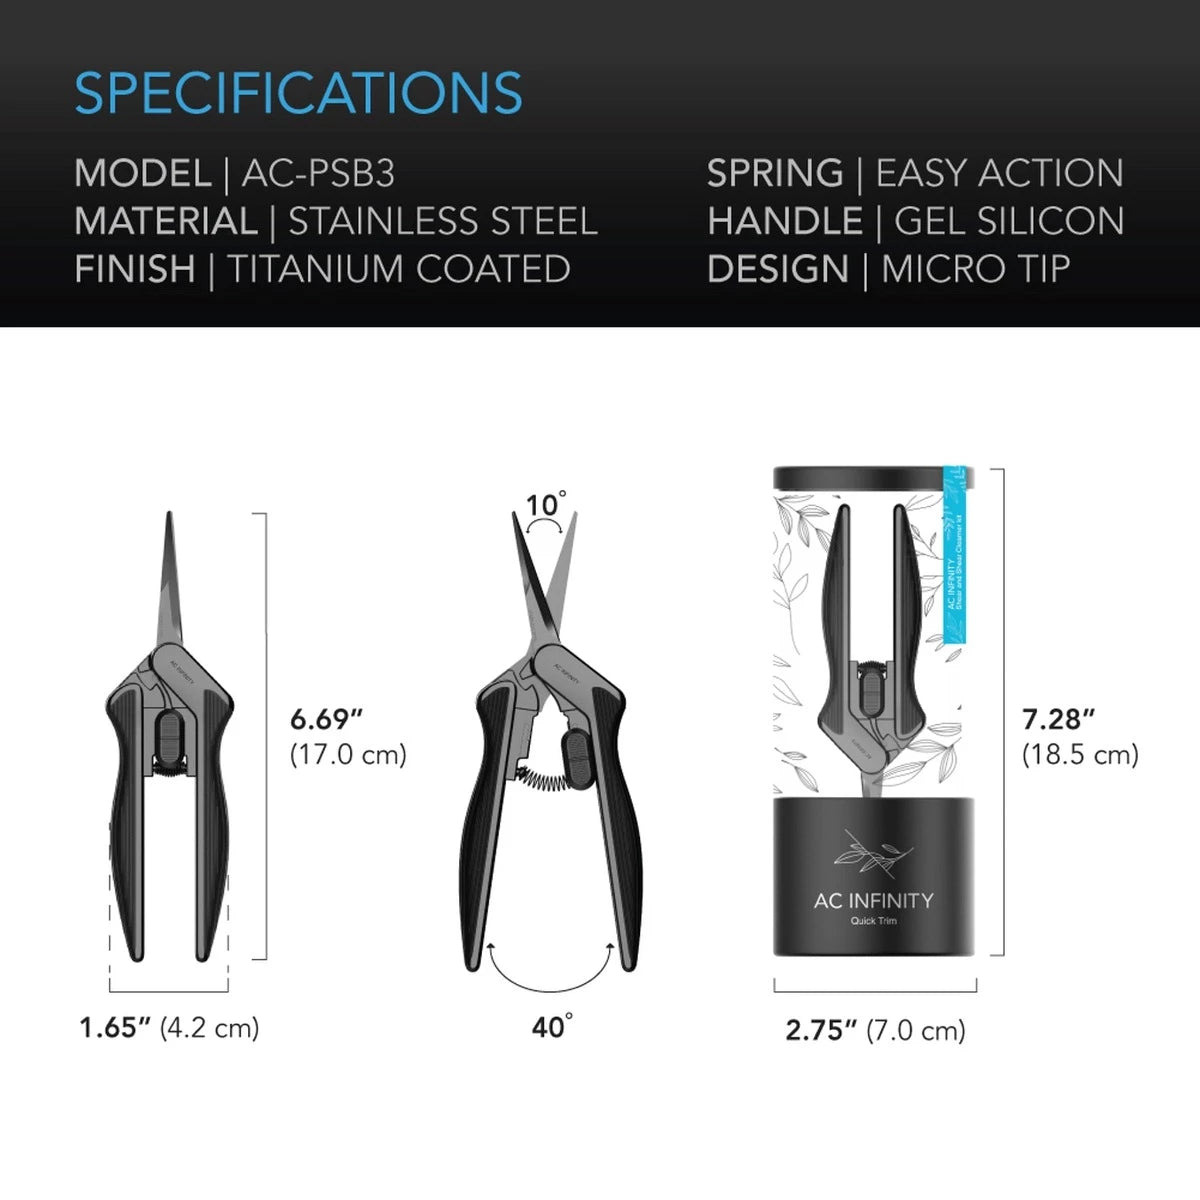 AC Infininty pruning shear with cleaning kit specifications